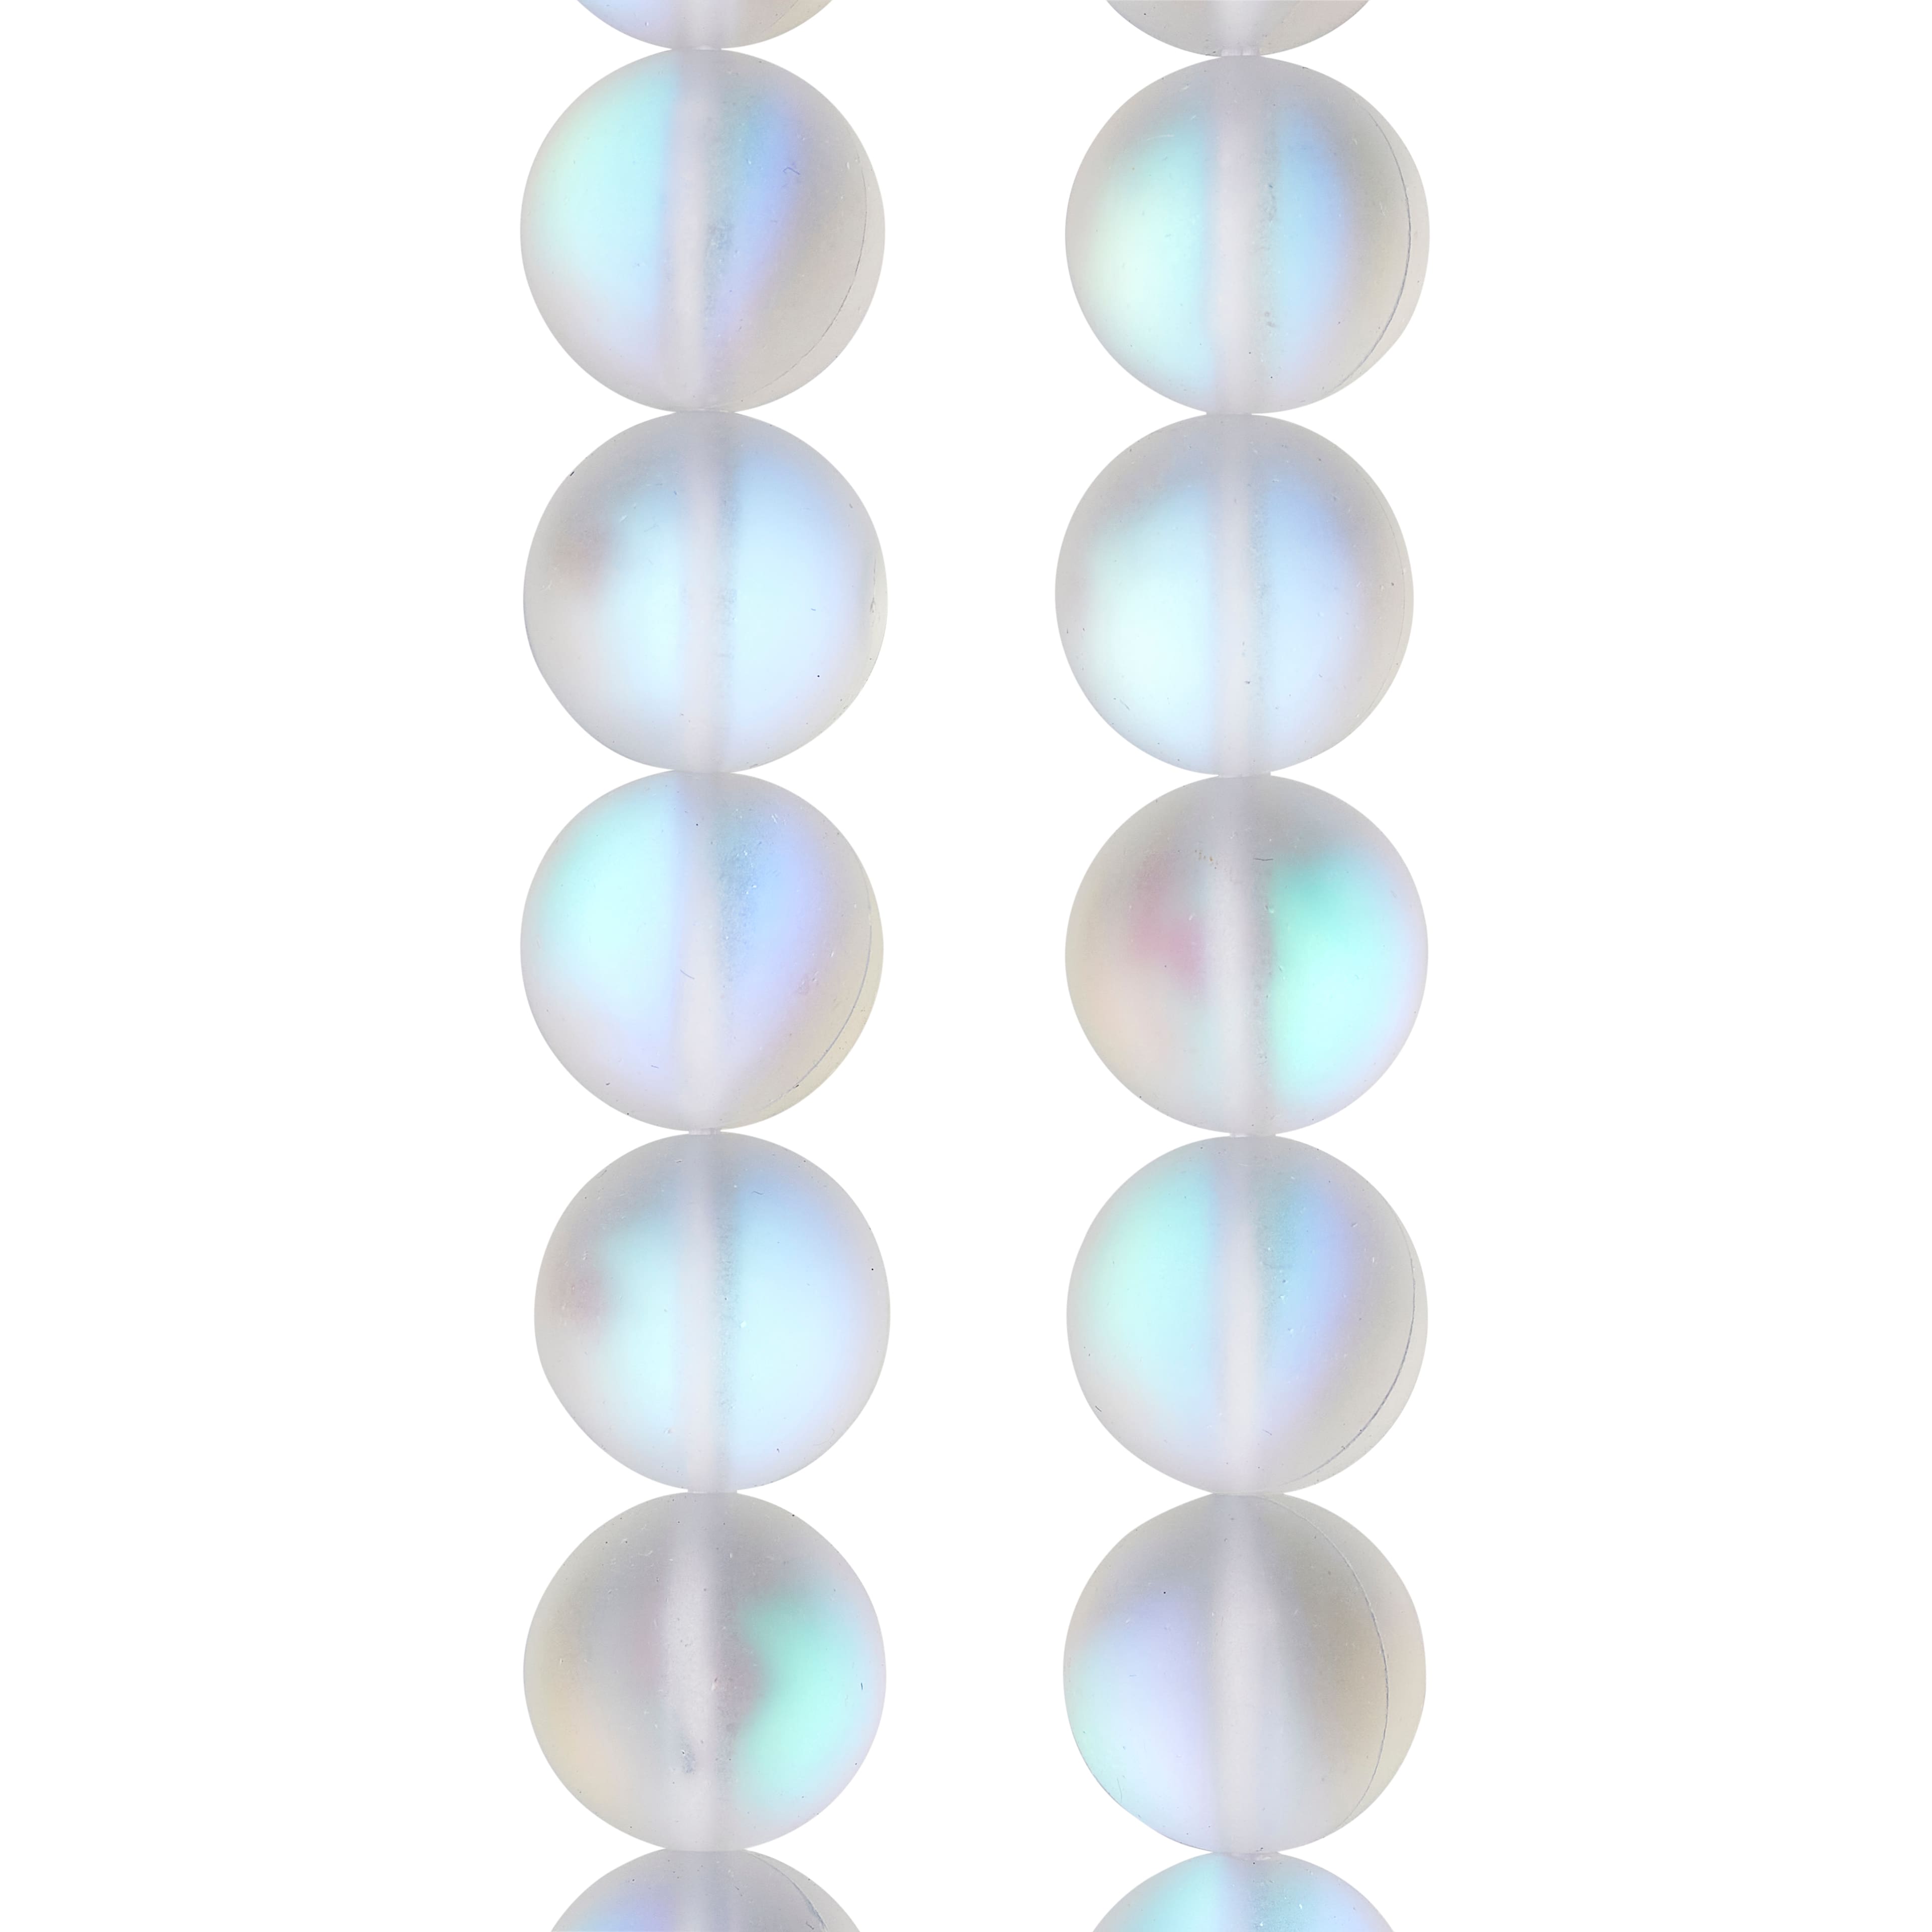 Approx. 12 Strand 8mm Glass Faceted Window Beads, White Opal/Rainbow Iris